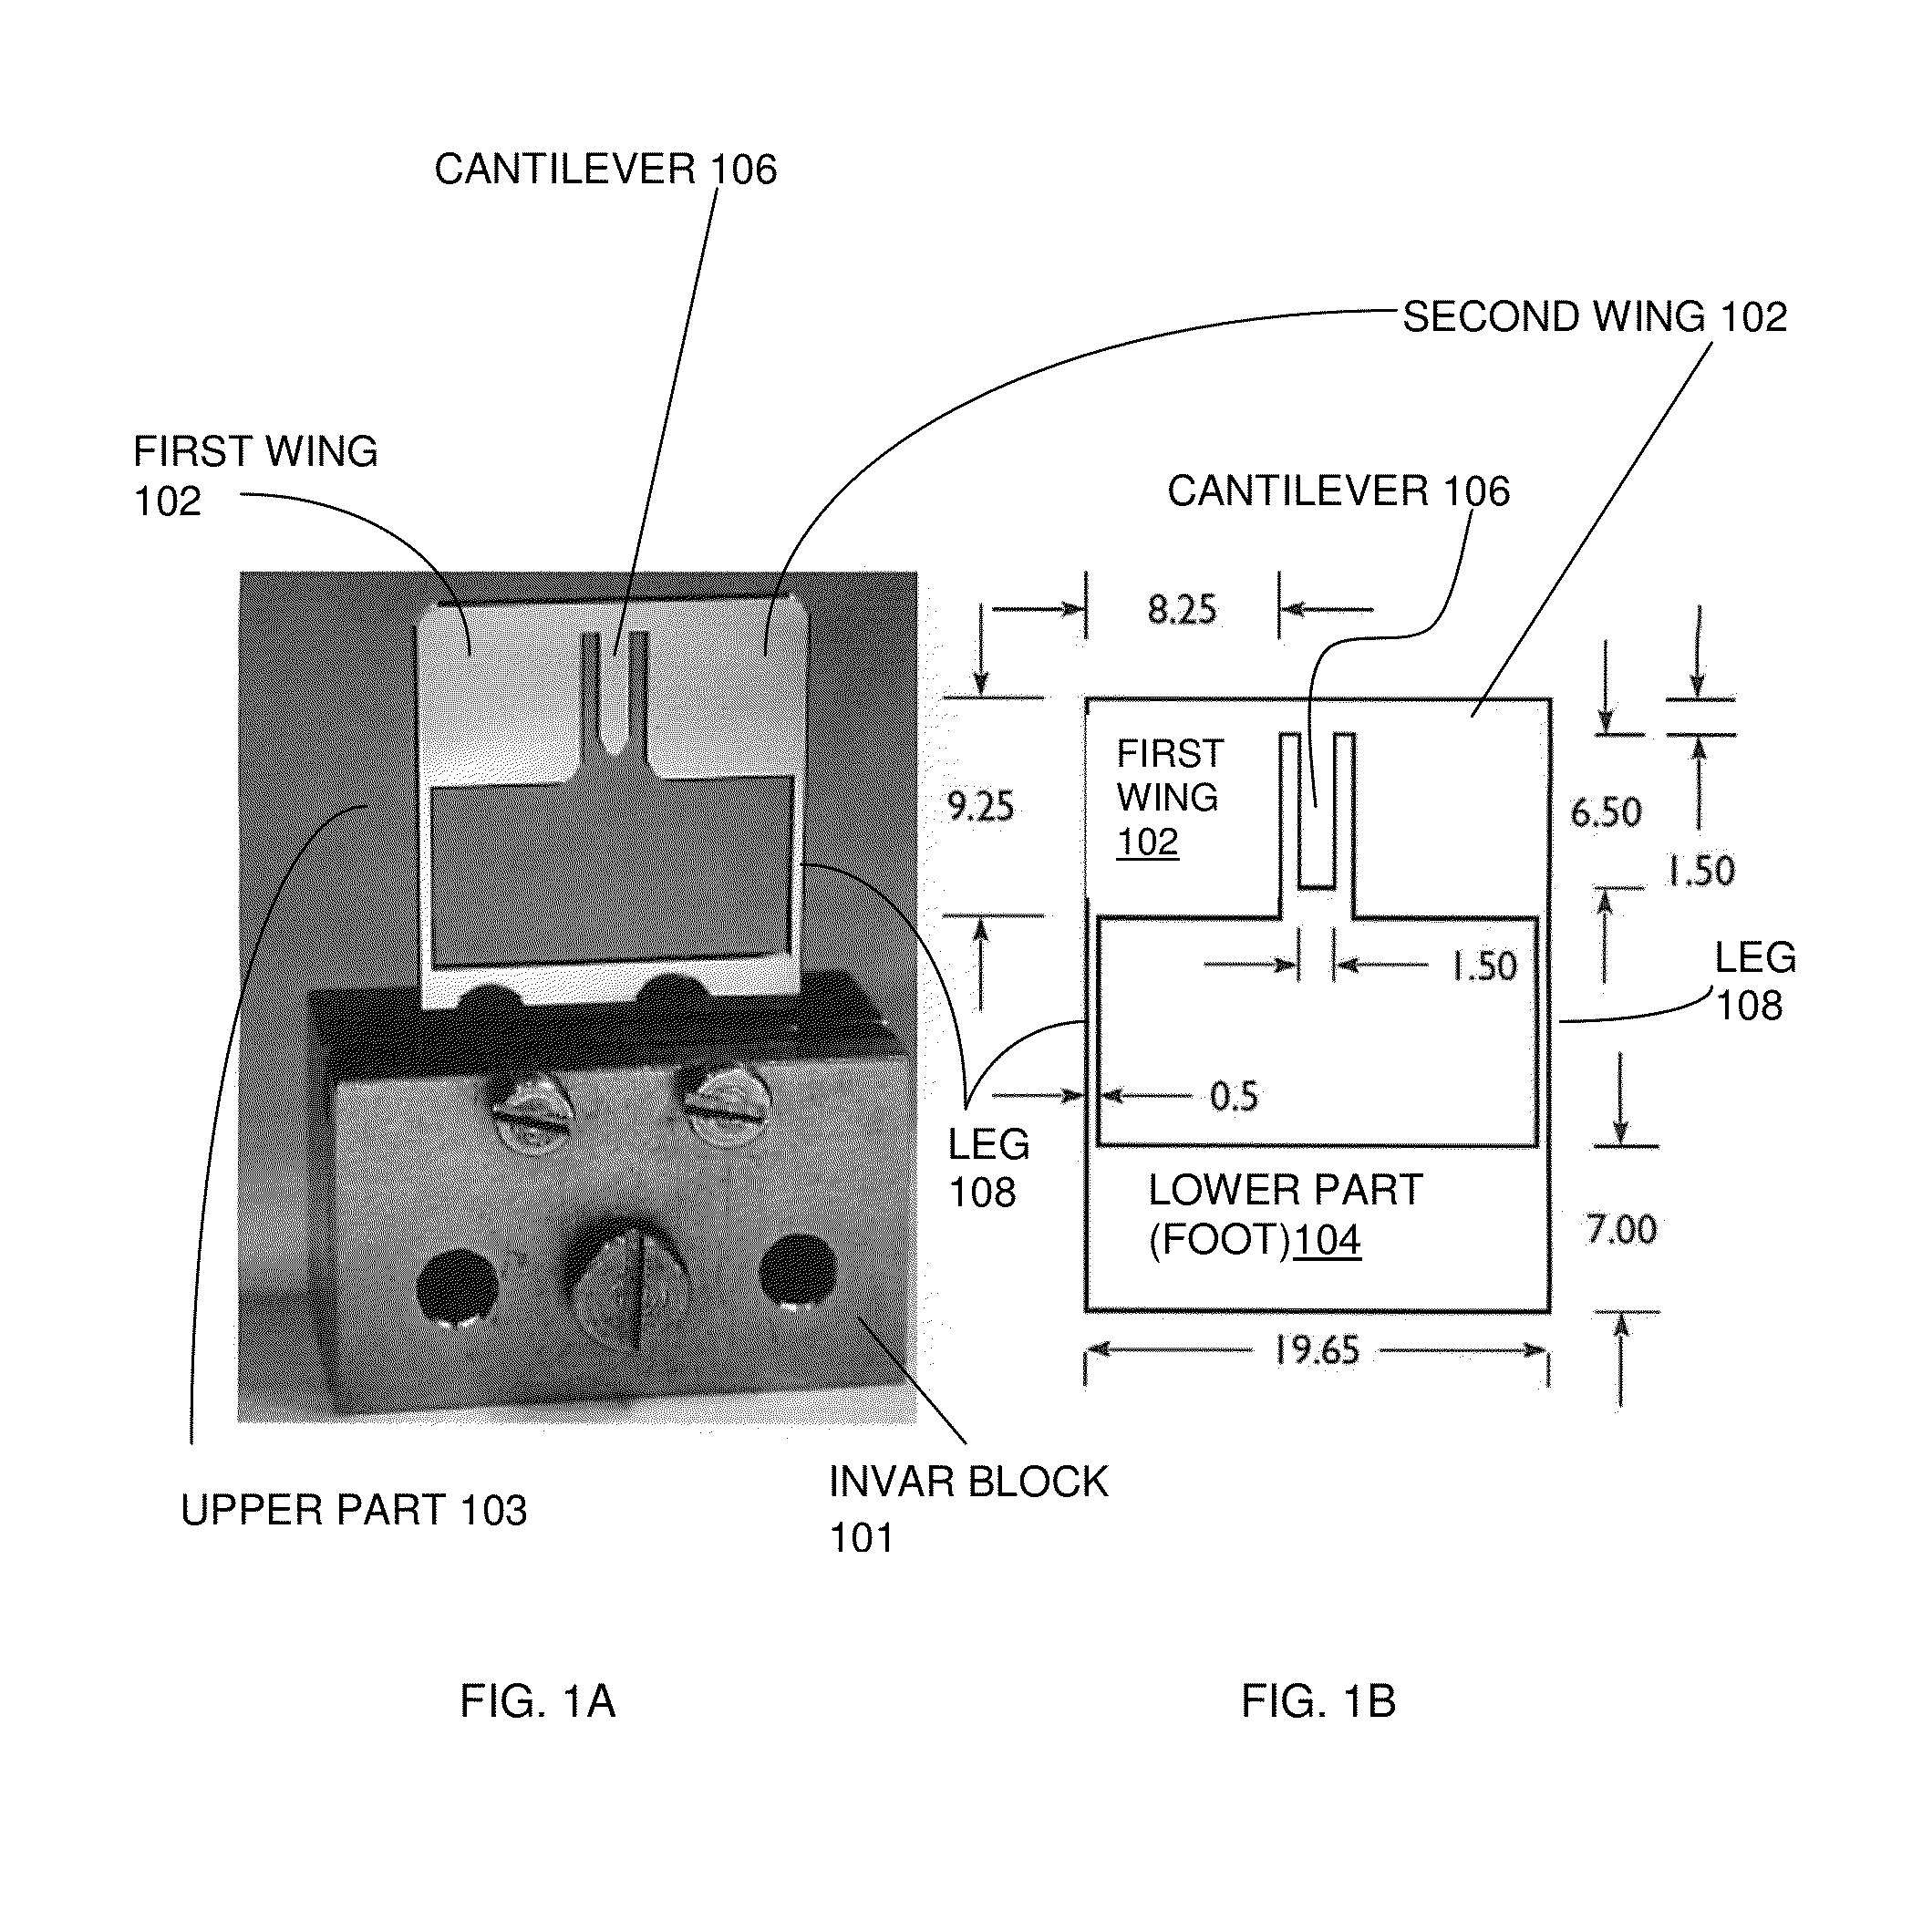 Method and system of an ultra high q silicon cantilever resonator for thin film internal friction and young's modulus measurements